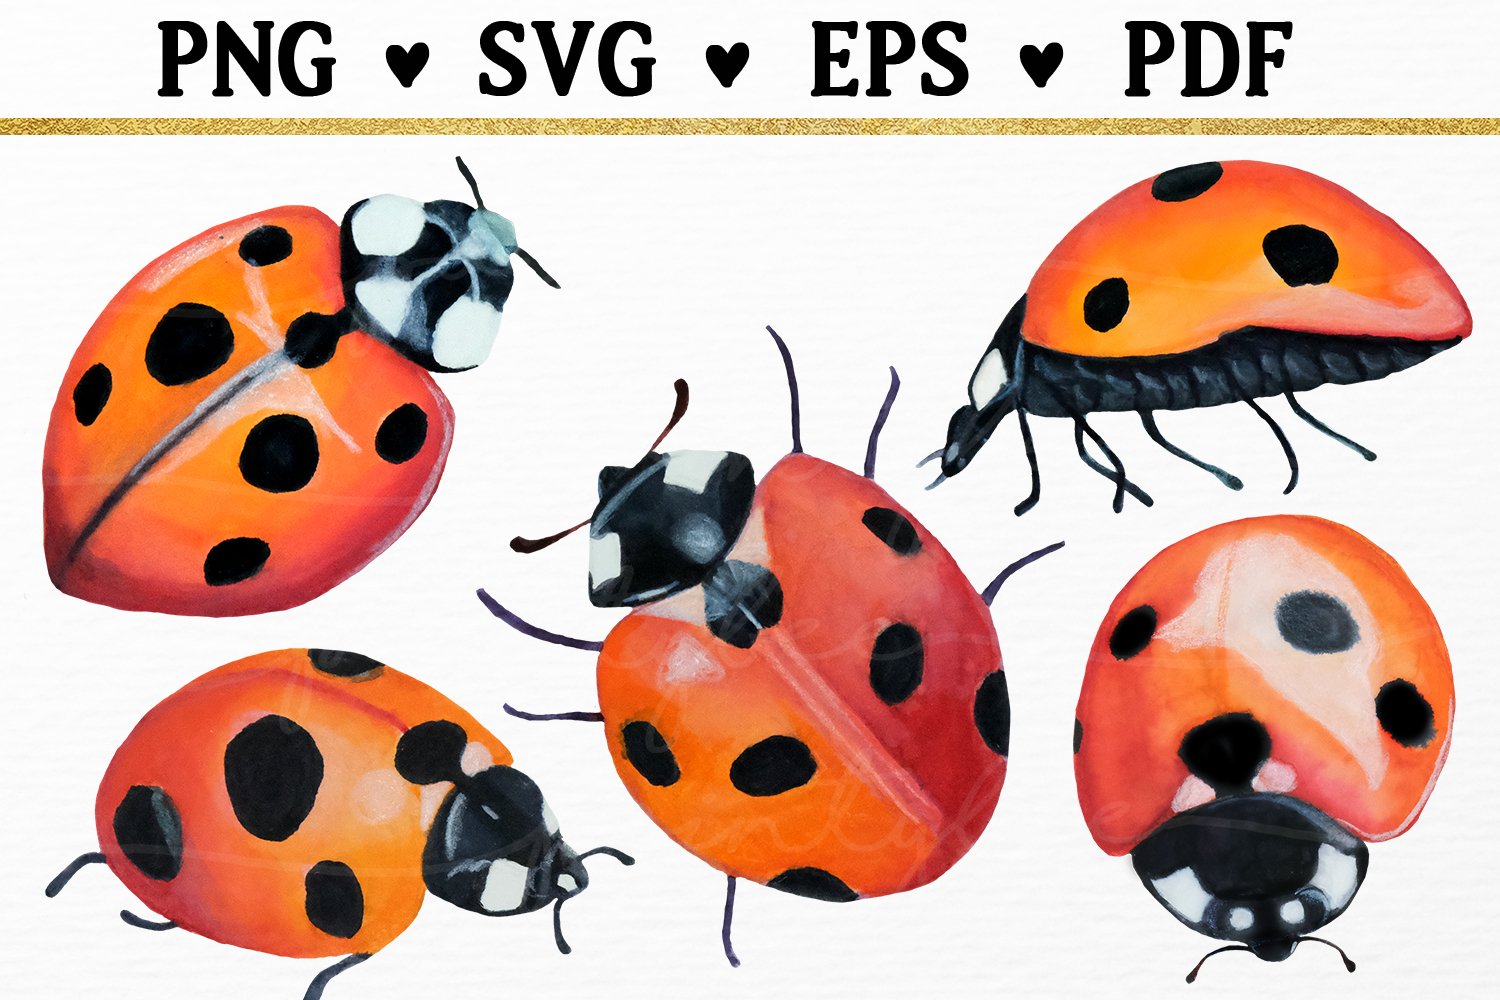 Cover image of Ladybug Watercolor Clipart.